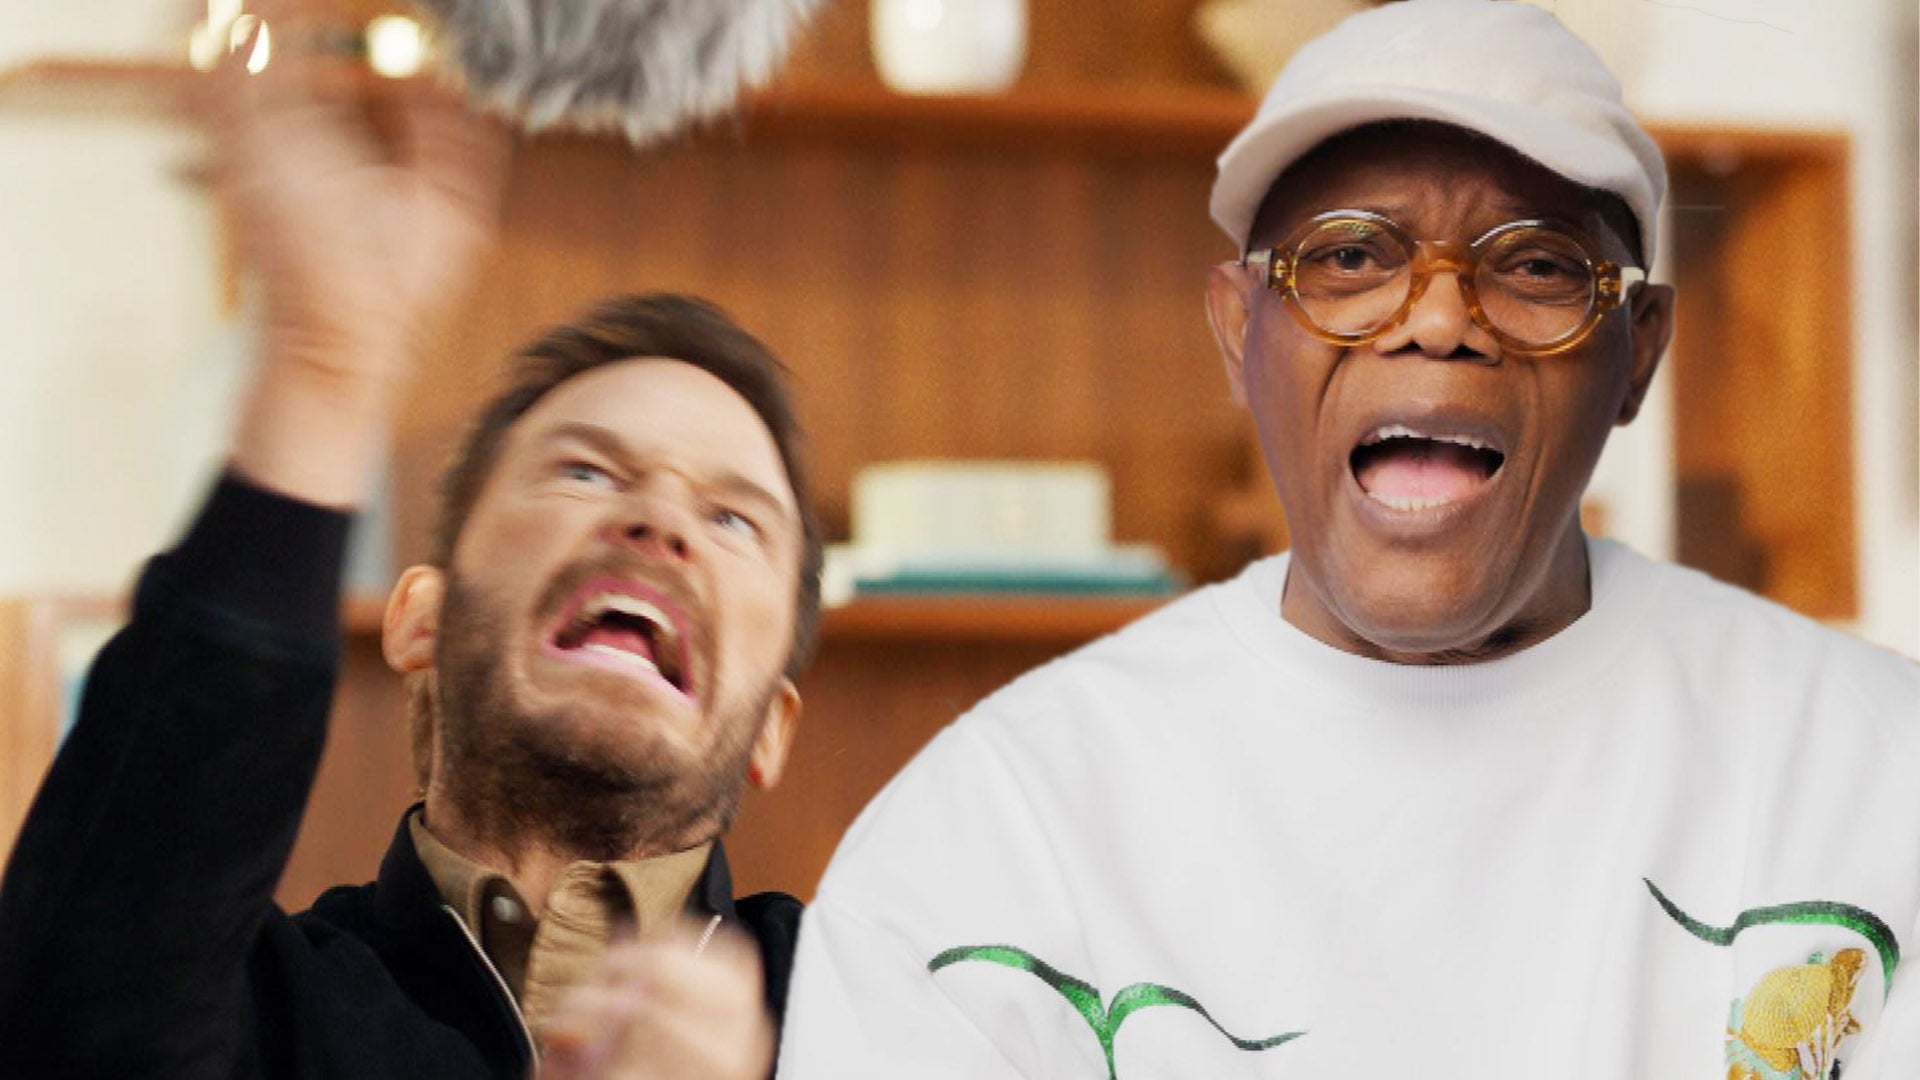 ‘The Garfield Movie:’ Watch Samuel L. Jackson Tease Chris Pratt for Staying in Character Too Long!